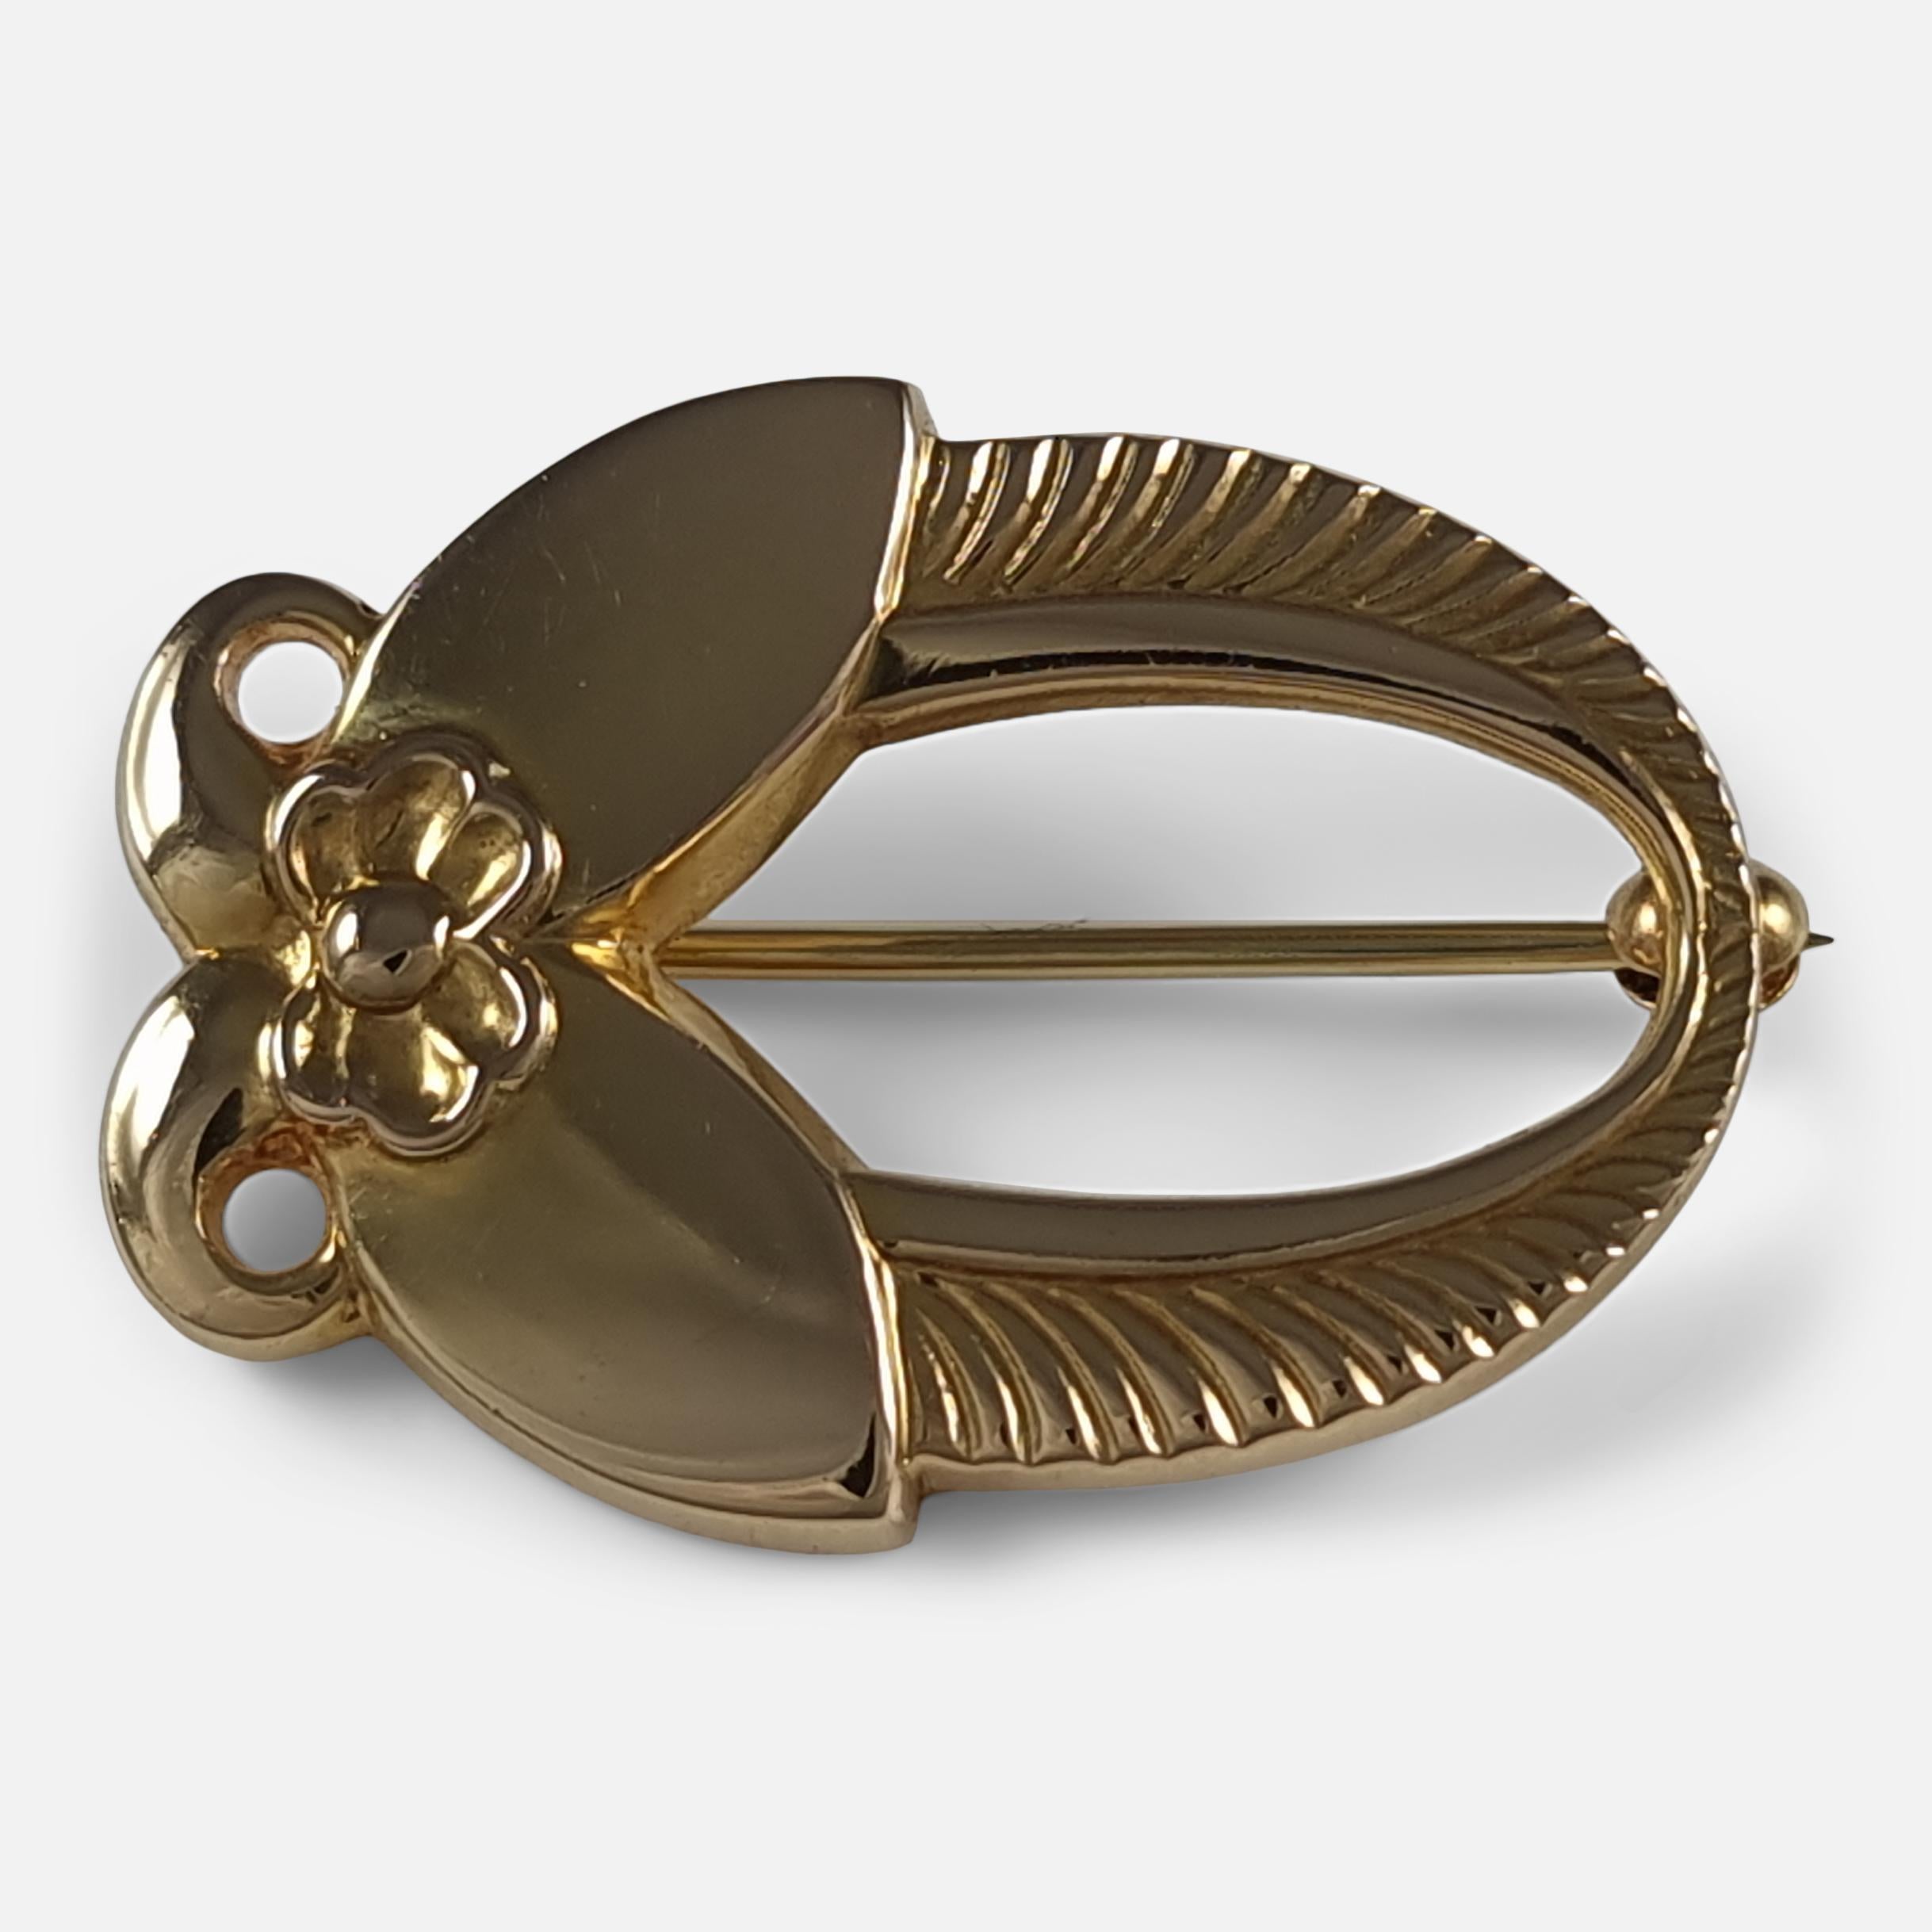 Georg Jensen 18ct yellow gold stylised floral brooch #1227, designed by Gundorph Albertus for Georg Jensen.

The brooch is stamped with the Georg Jensen mark used since 1945, '750', '18K', & '1227'. Also hallmarked with Edinburgh assay marks, and